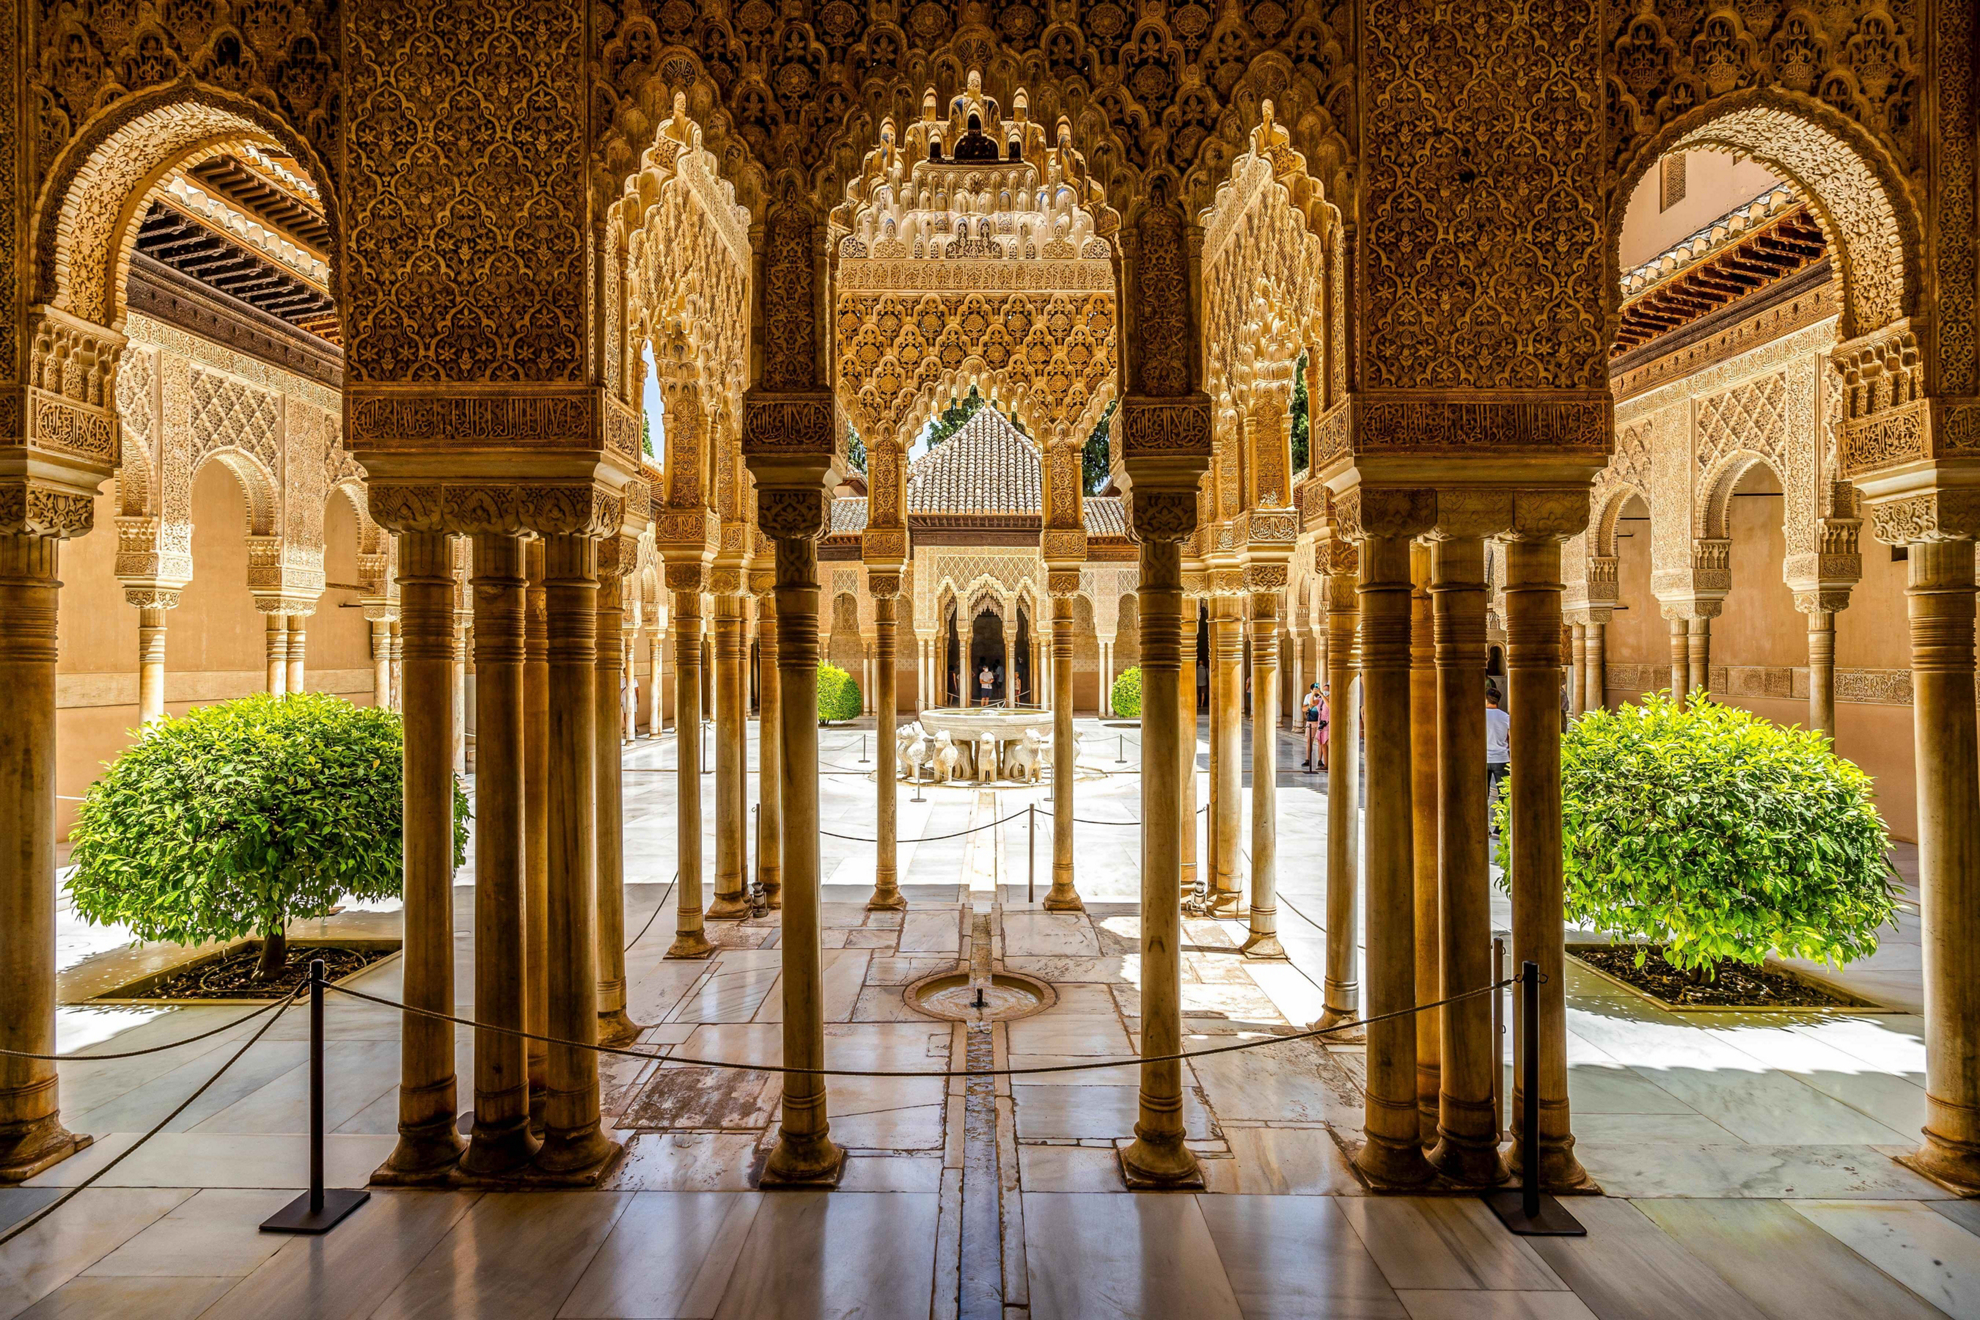 History of the Alhambra: Elaborate arches inside the Alhambra, leading onto a courtyard